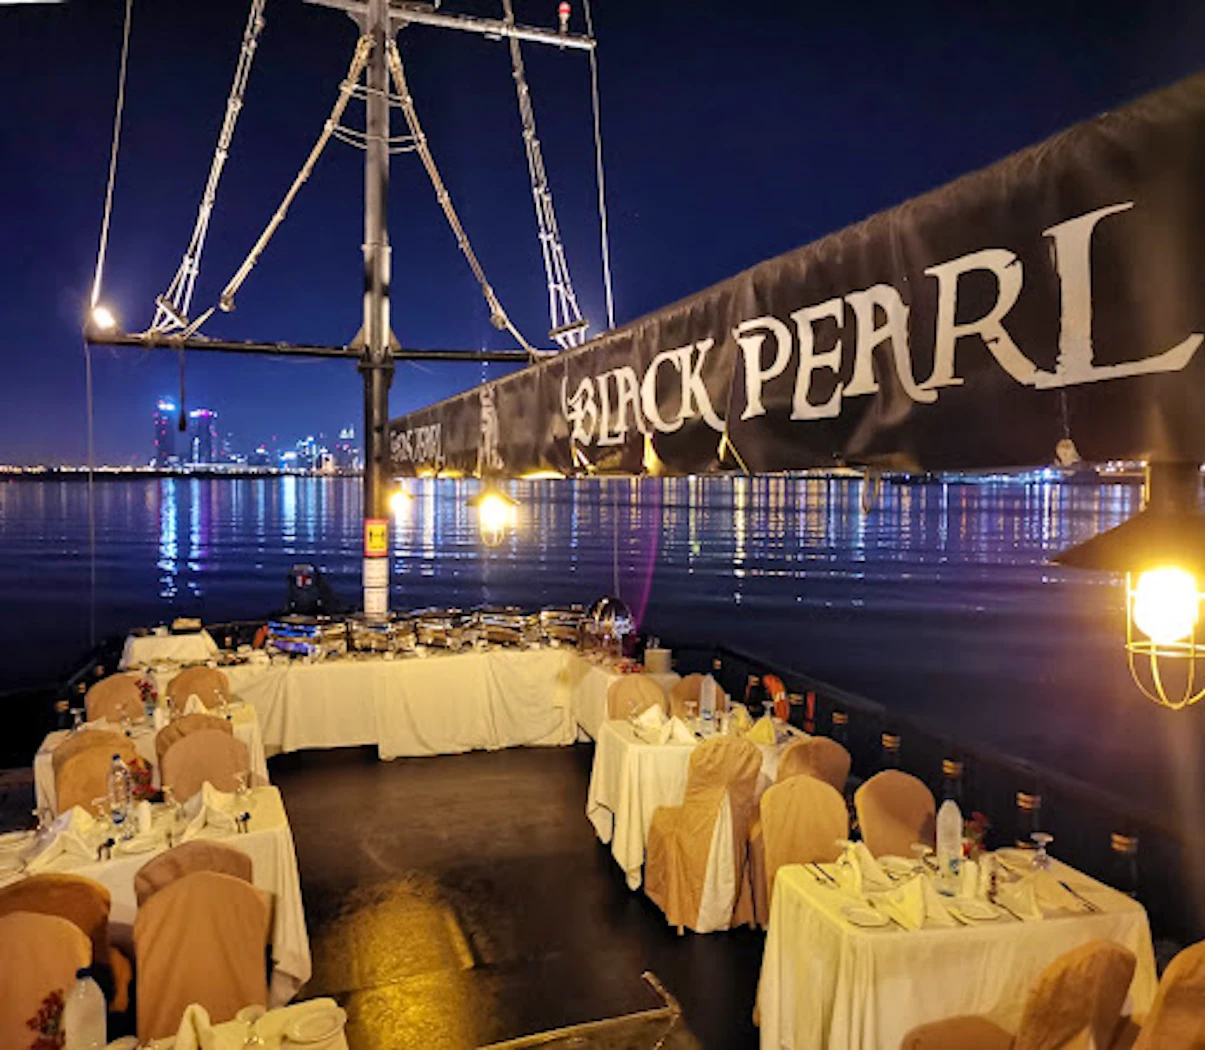 Black Pearl Themed Sightseeing Cruise Review